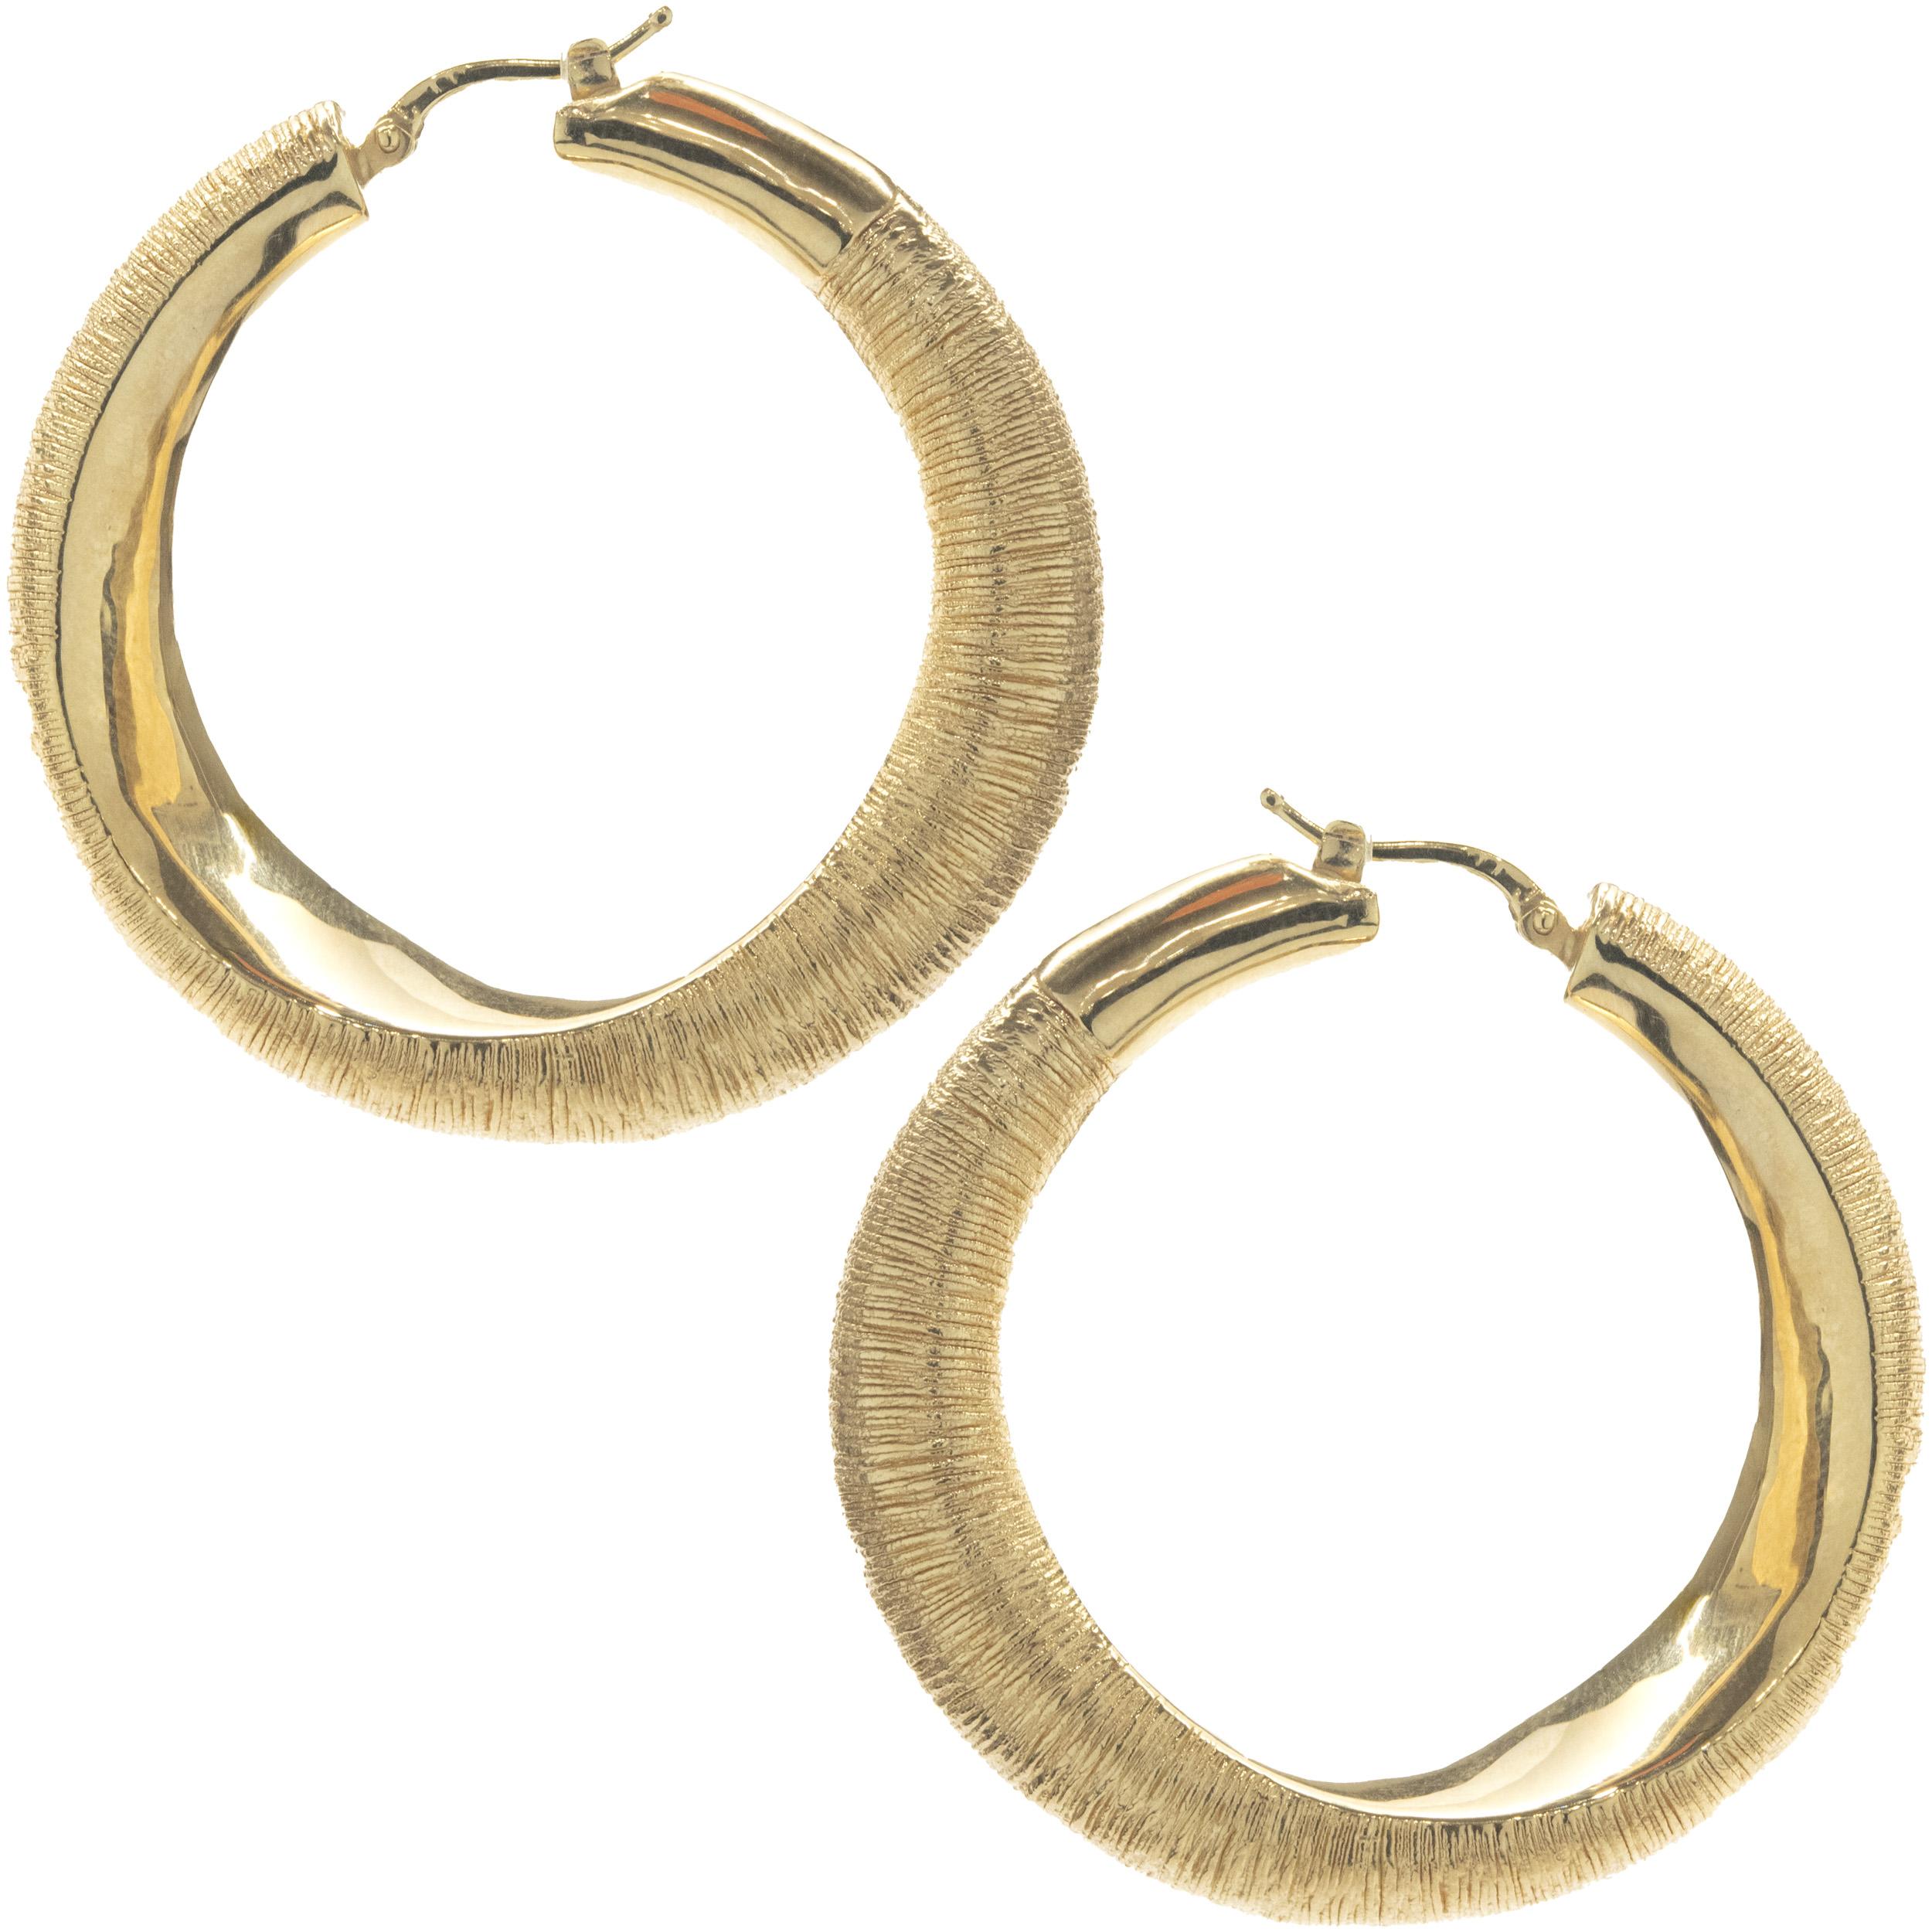 Material: 18K yellow gold
Dimensions: earrings measure 44mm in length
Weight: 11.72 grams